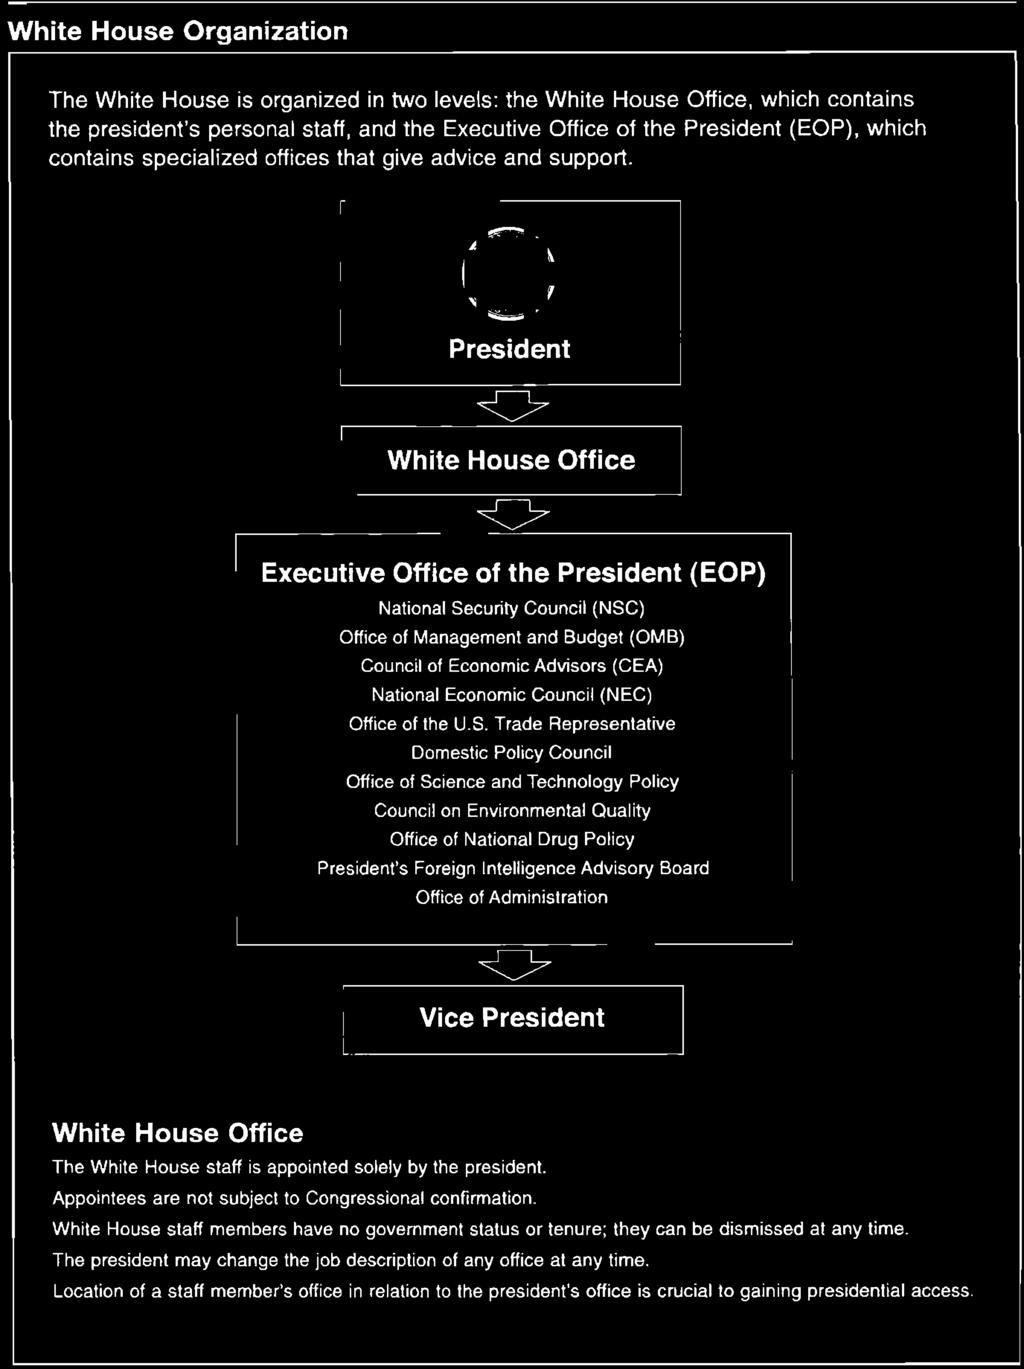 President o White House Office <> Executive Office of the President (EOP) National Security Council (NSC) Office of Management and Budget (OMB) Council of Economic Advisors (CEA) National Economic